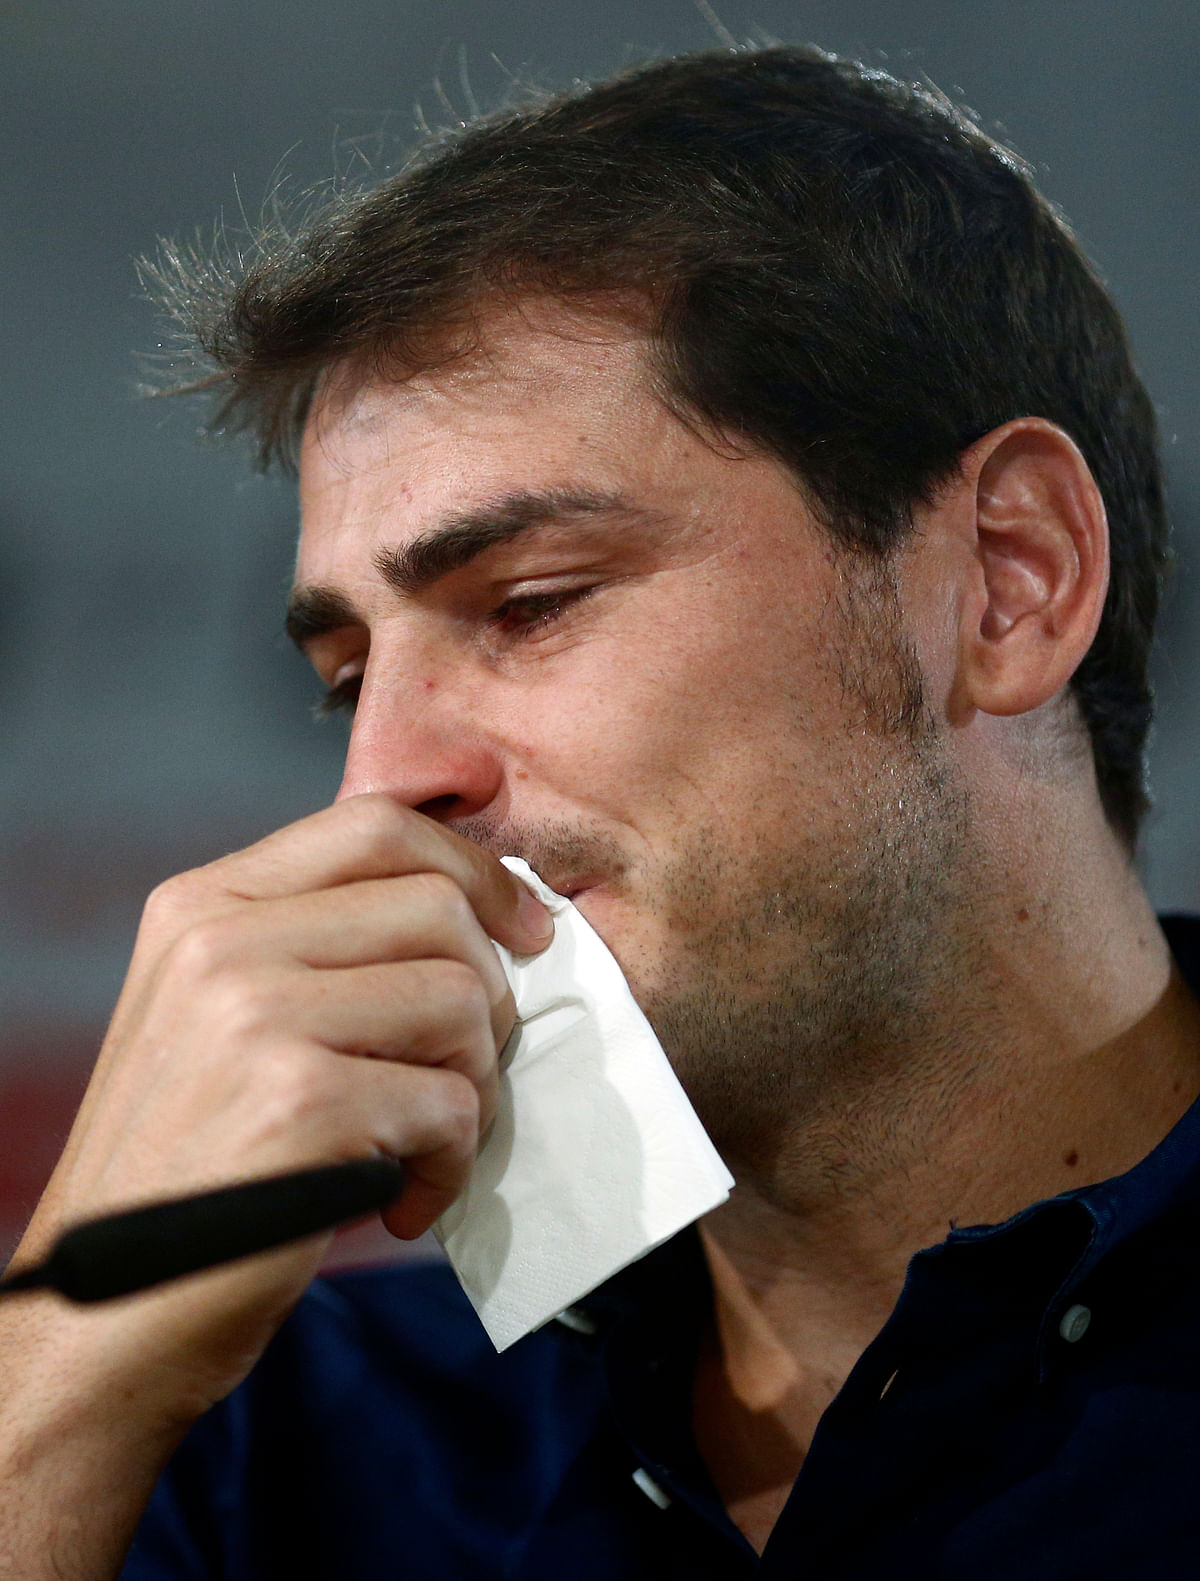 A very emotional and teary Iker Casillas struggles to speak while formally announcing his departure from Real Madrid.